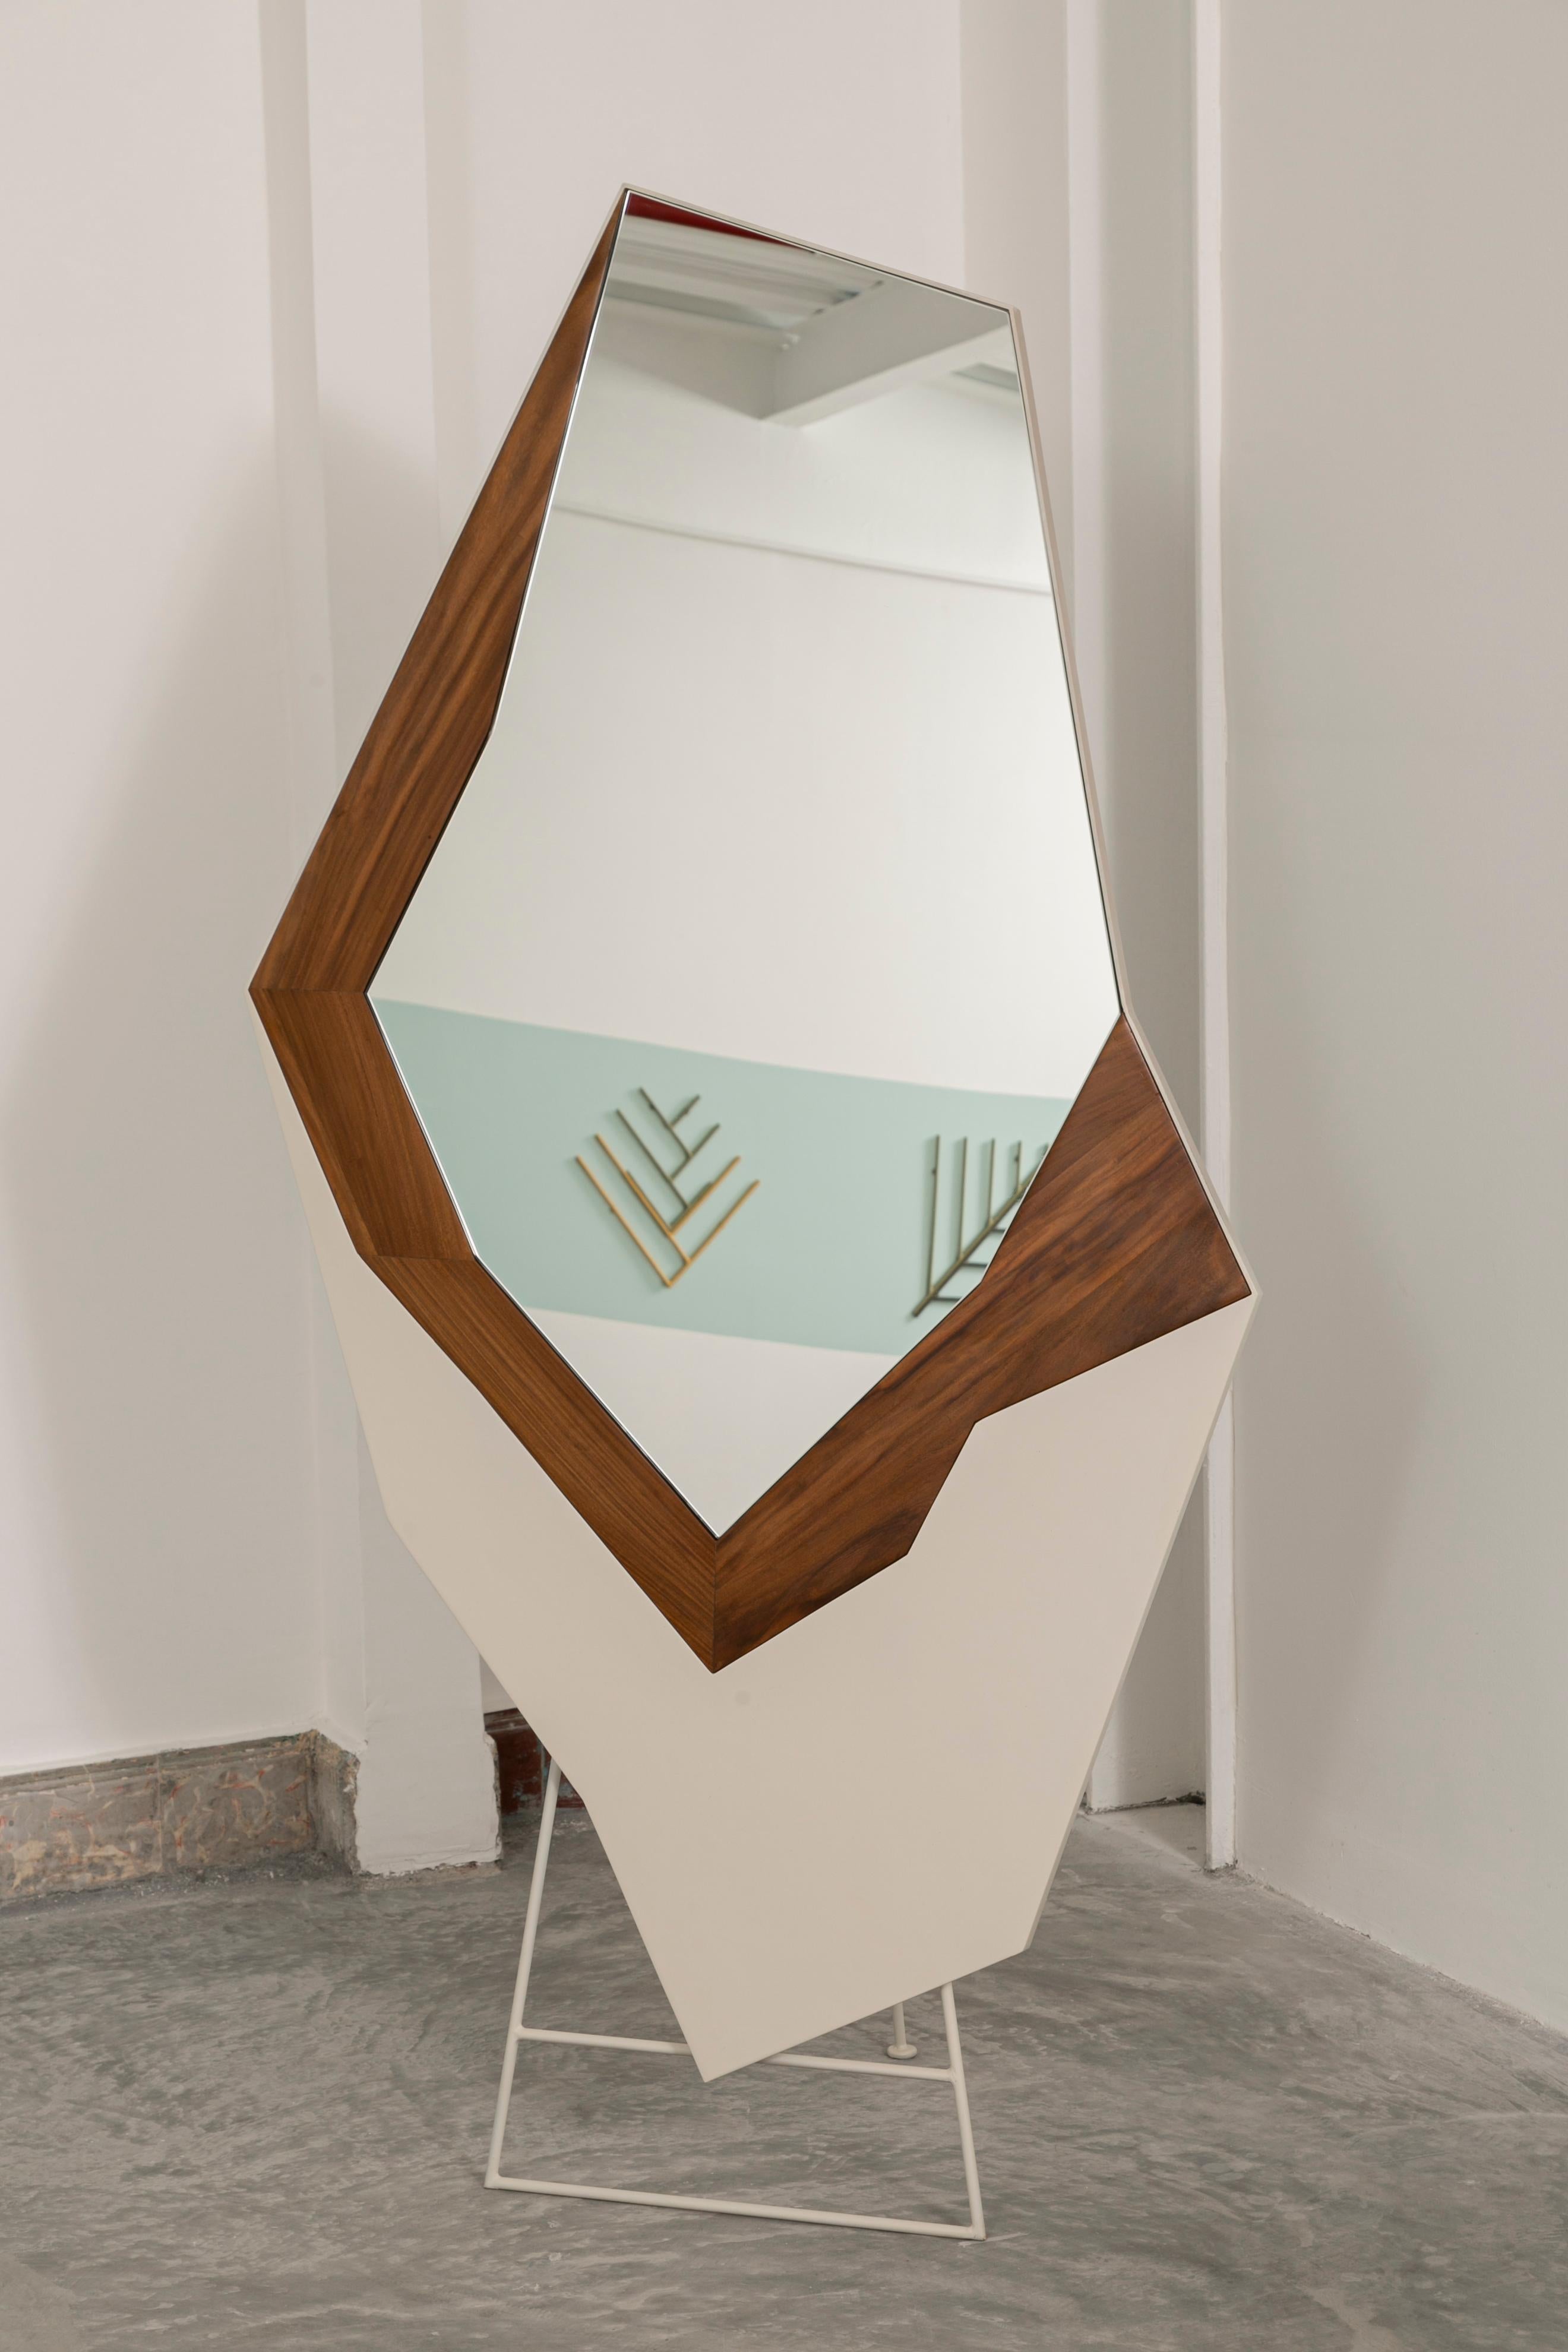 New life mirror by Sofia Alvarado
Dimensions: D 80x H 160 cm
Materials: Guayacán wood / Lacquered solid metal
Limited edition 1/10

FI is an ornamental artist who embodies the creative revelation of the sensitivity of the innate being, with